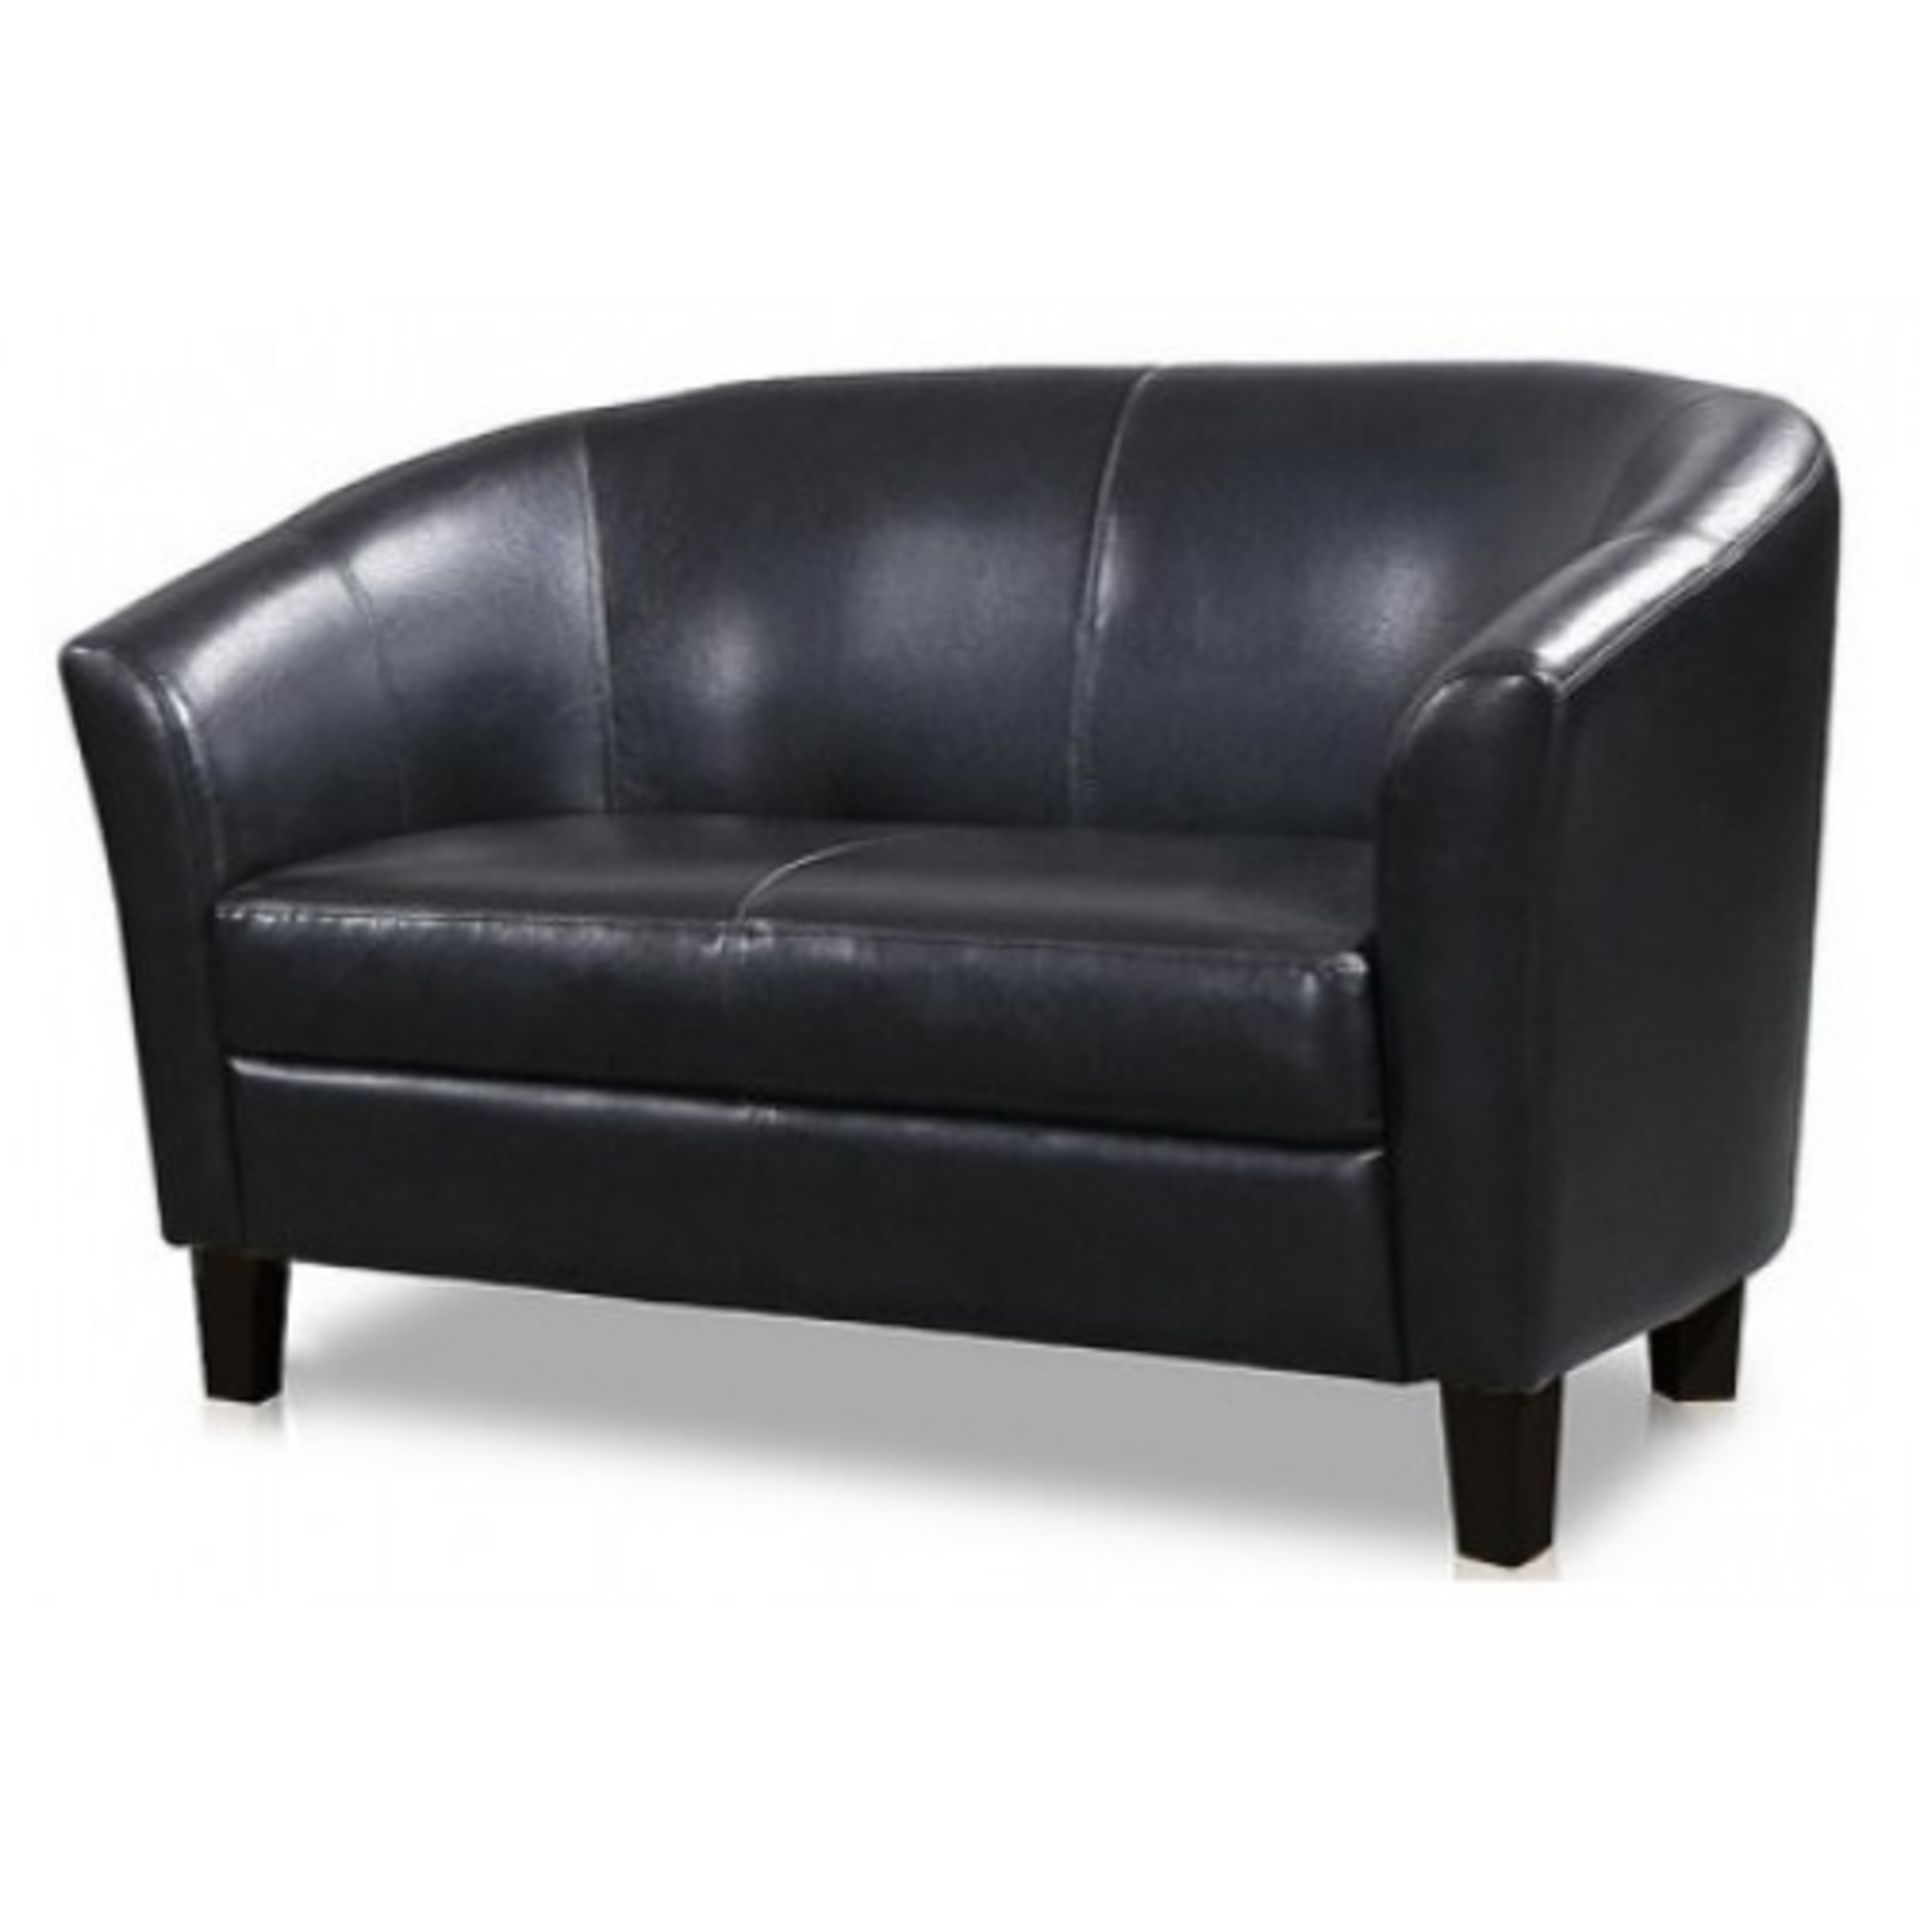 Black faux leather 2 seater tub sofa with dark wooden legs